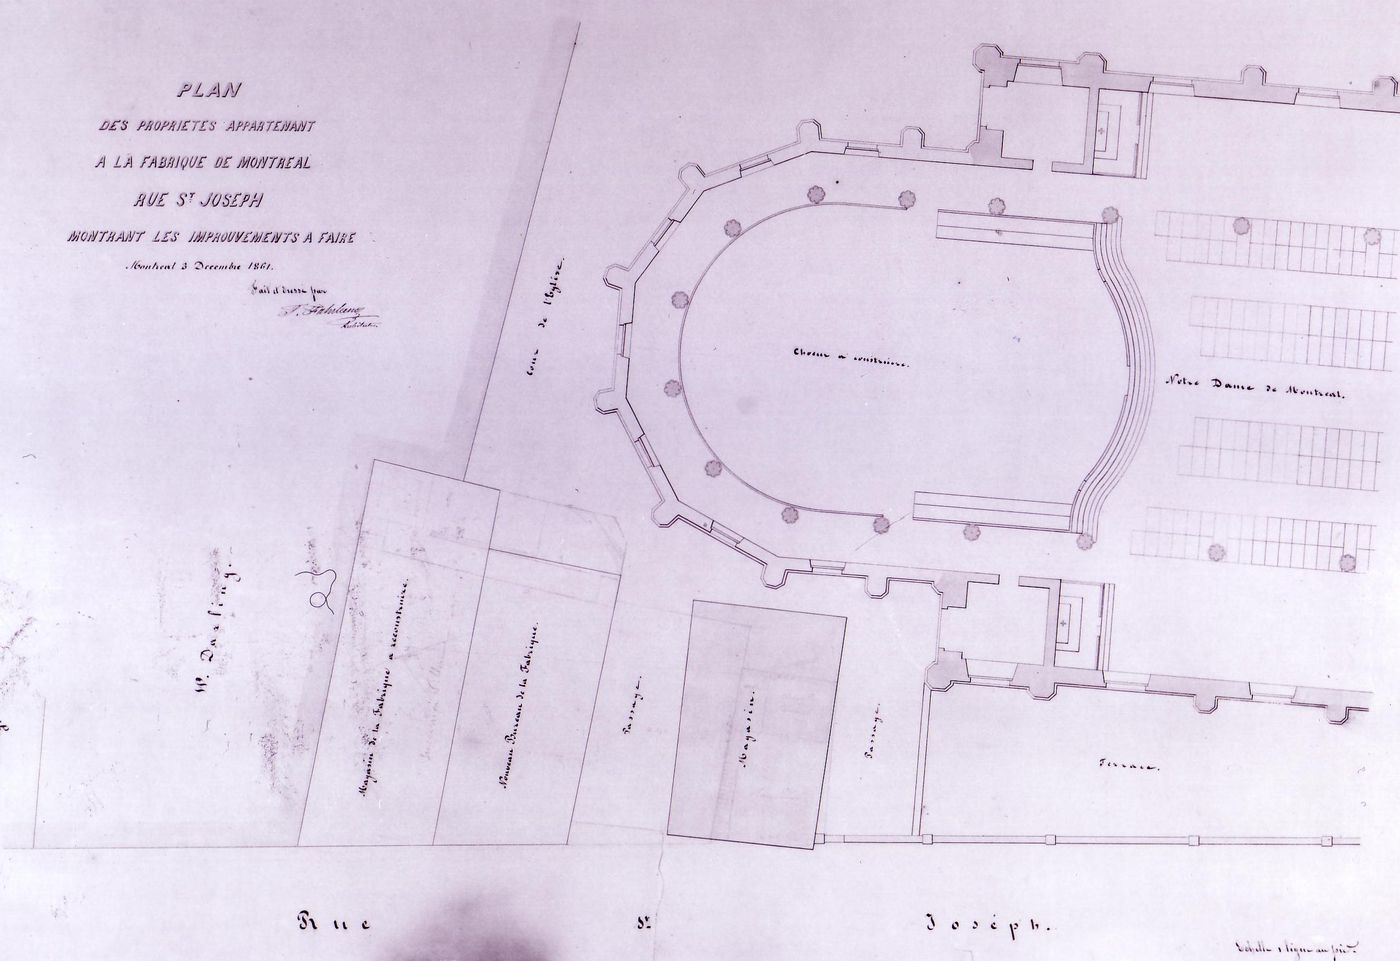 Site plan of Notre-Dame de Montréal and adjoining buildings for the renovations of the 1860s